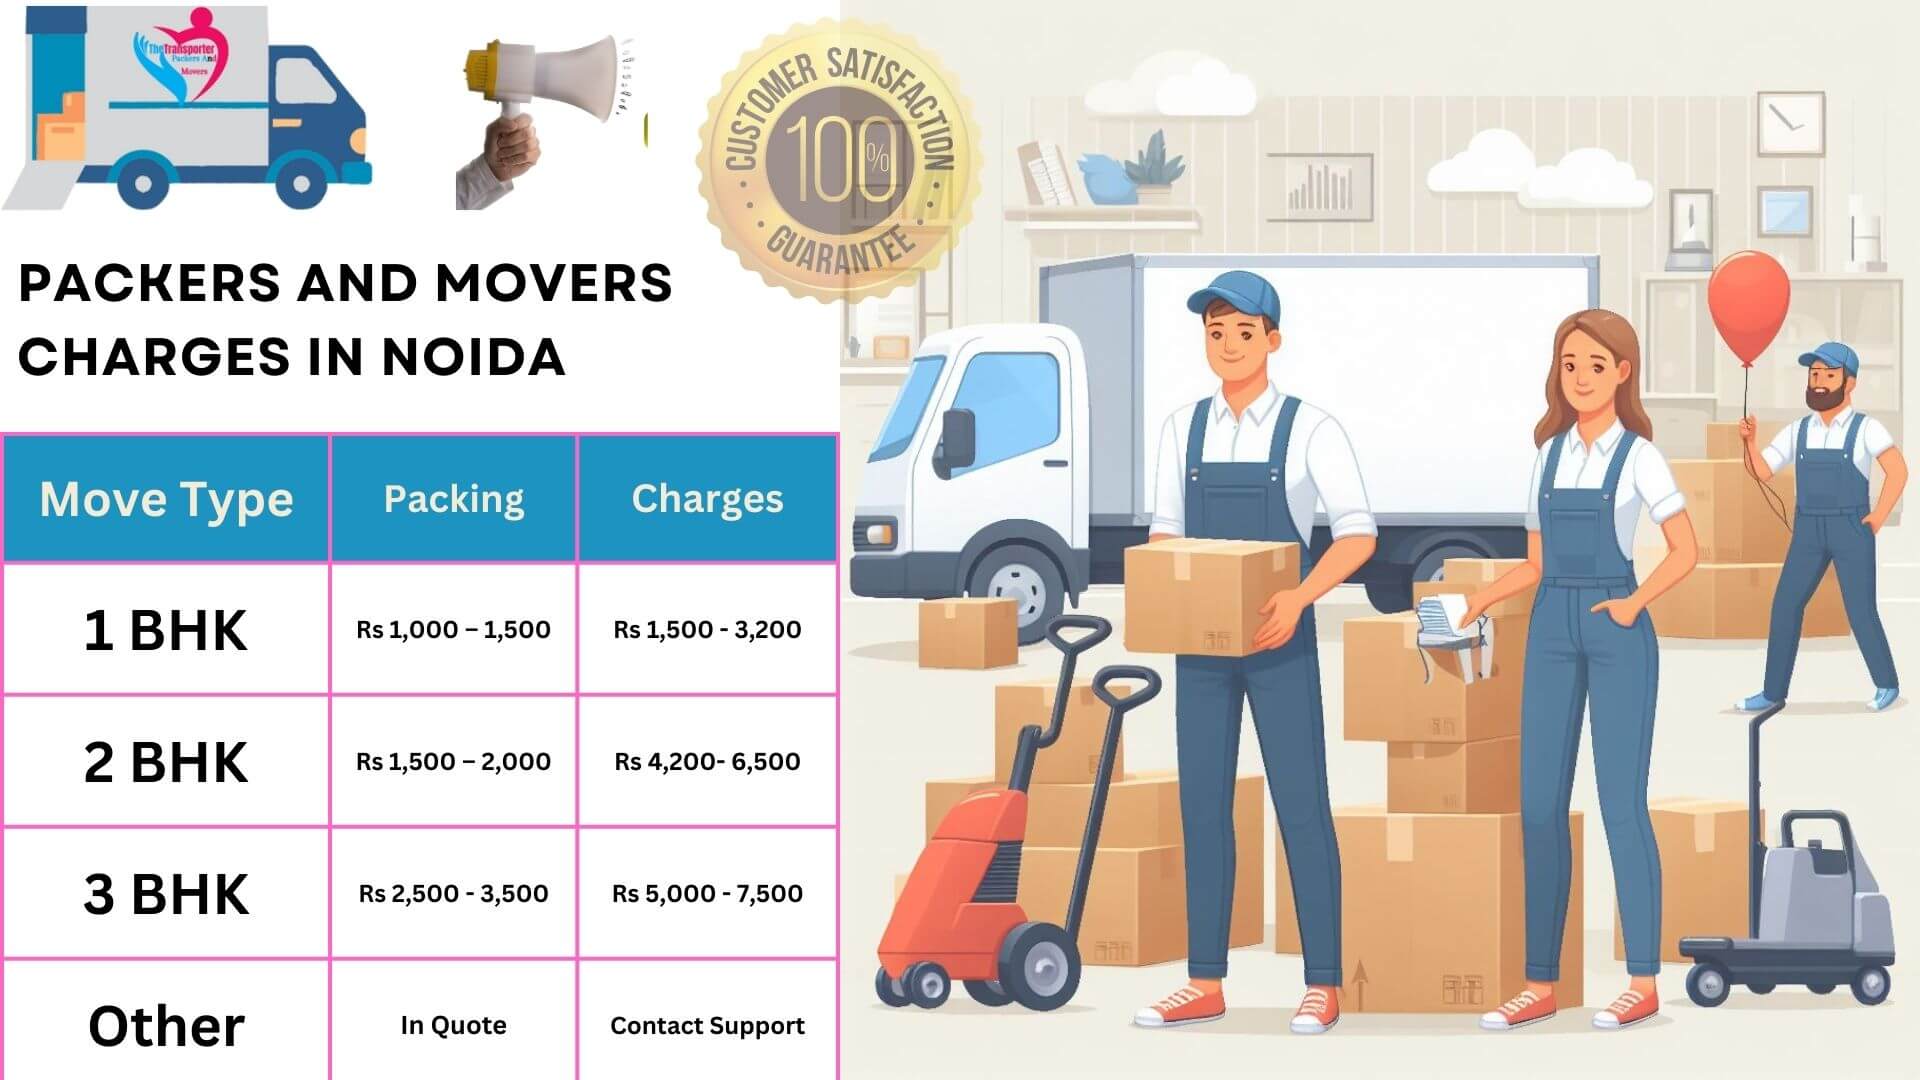 TheTransporter Packers and movers Charges list in Noida 